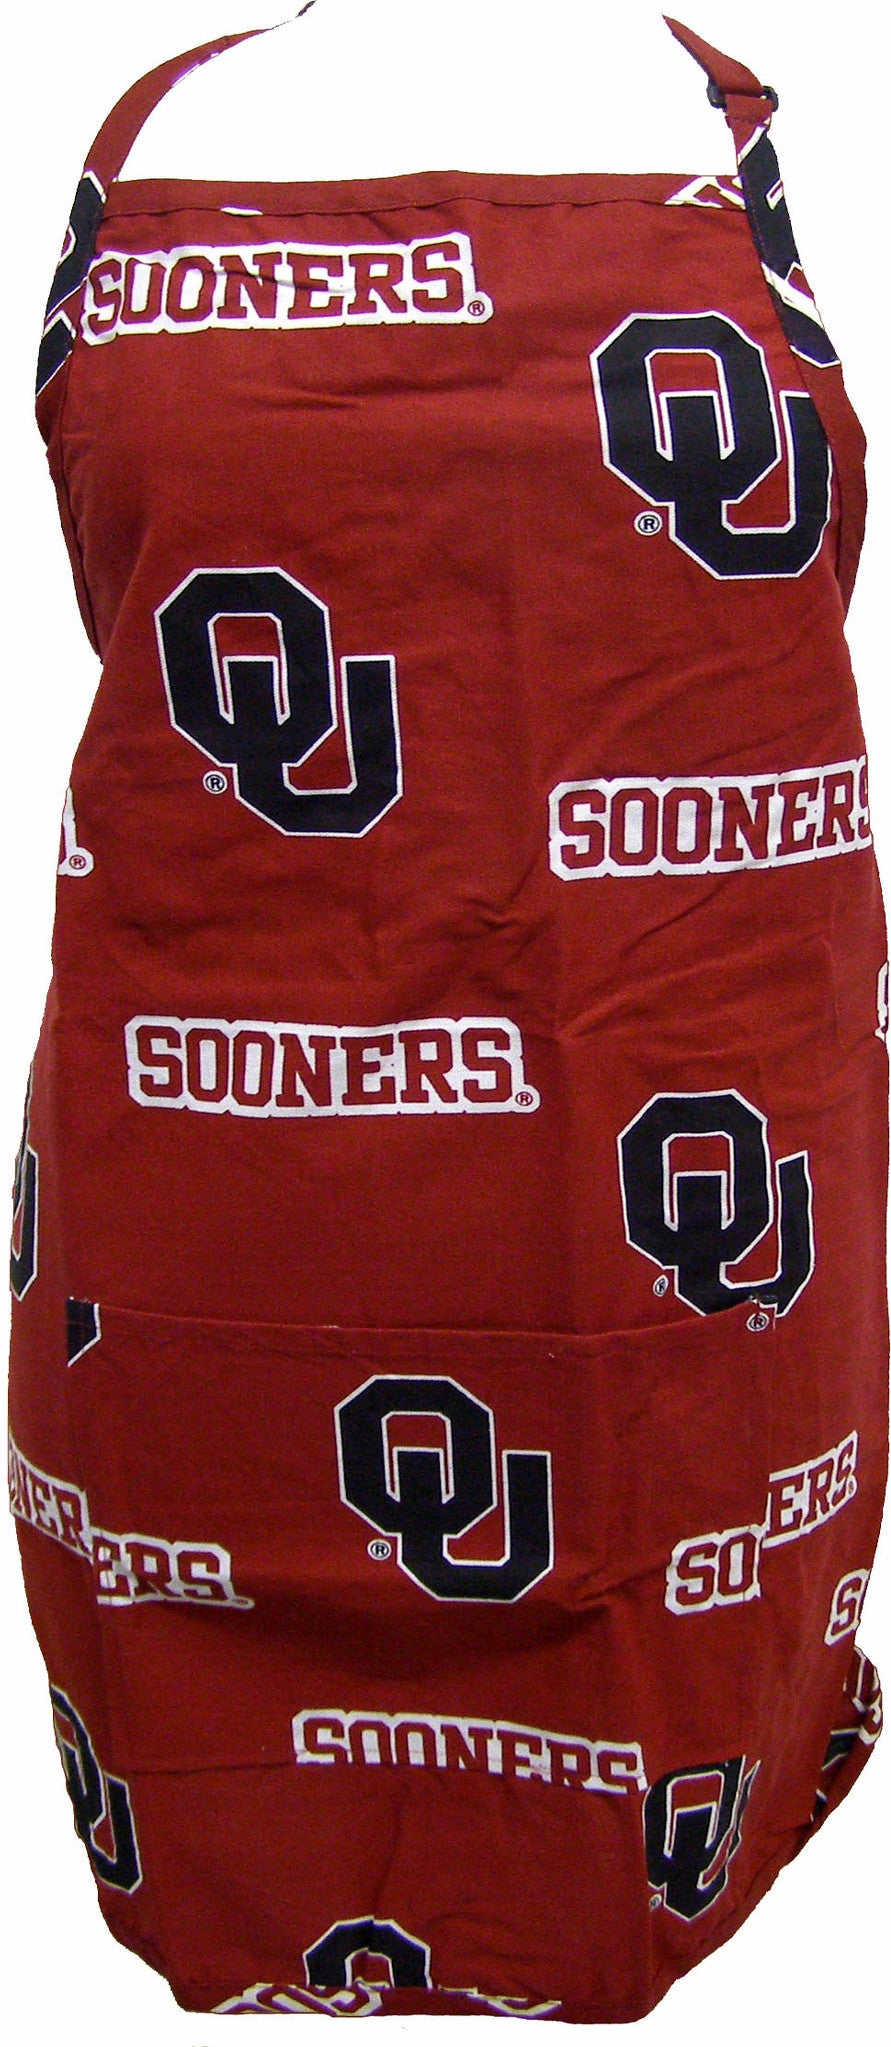 Oklahoma Apron 26"x35" With 9" Pocket - Oklapr By College Covers